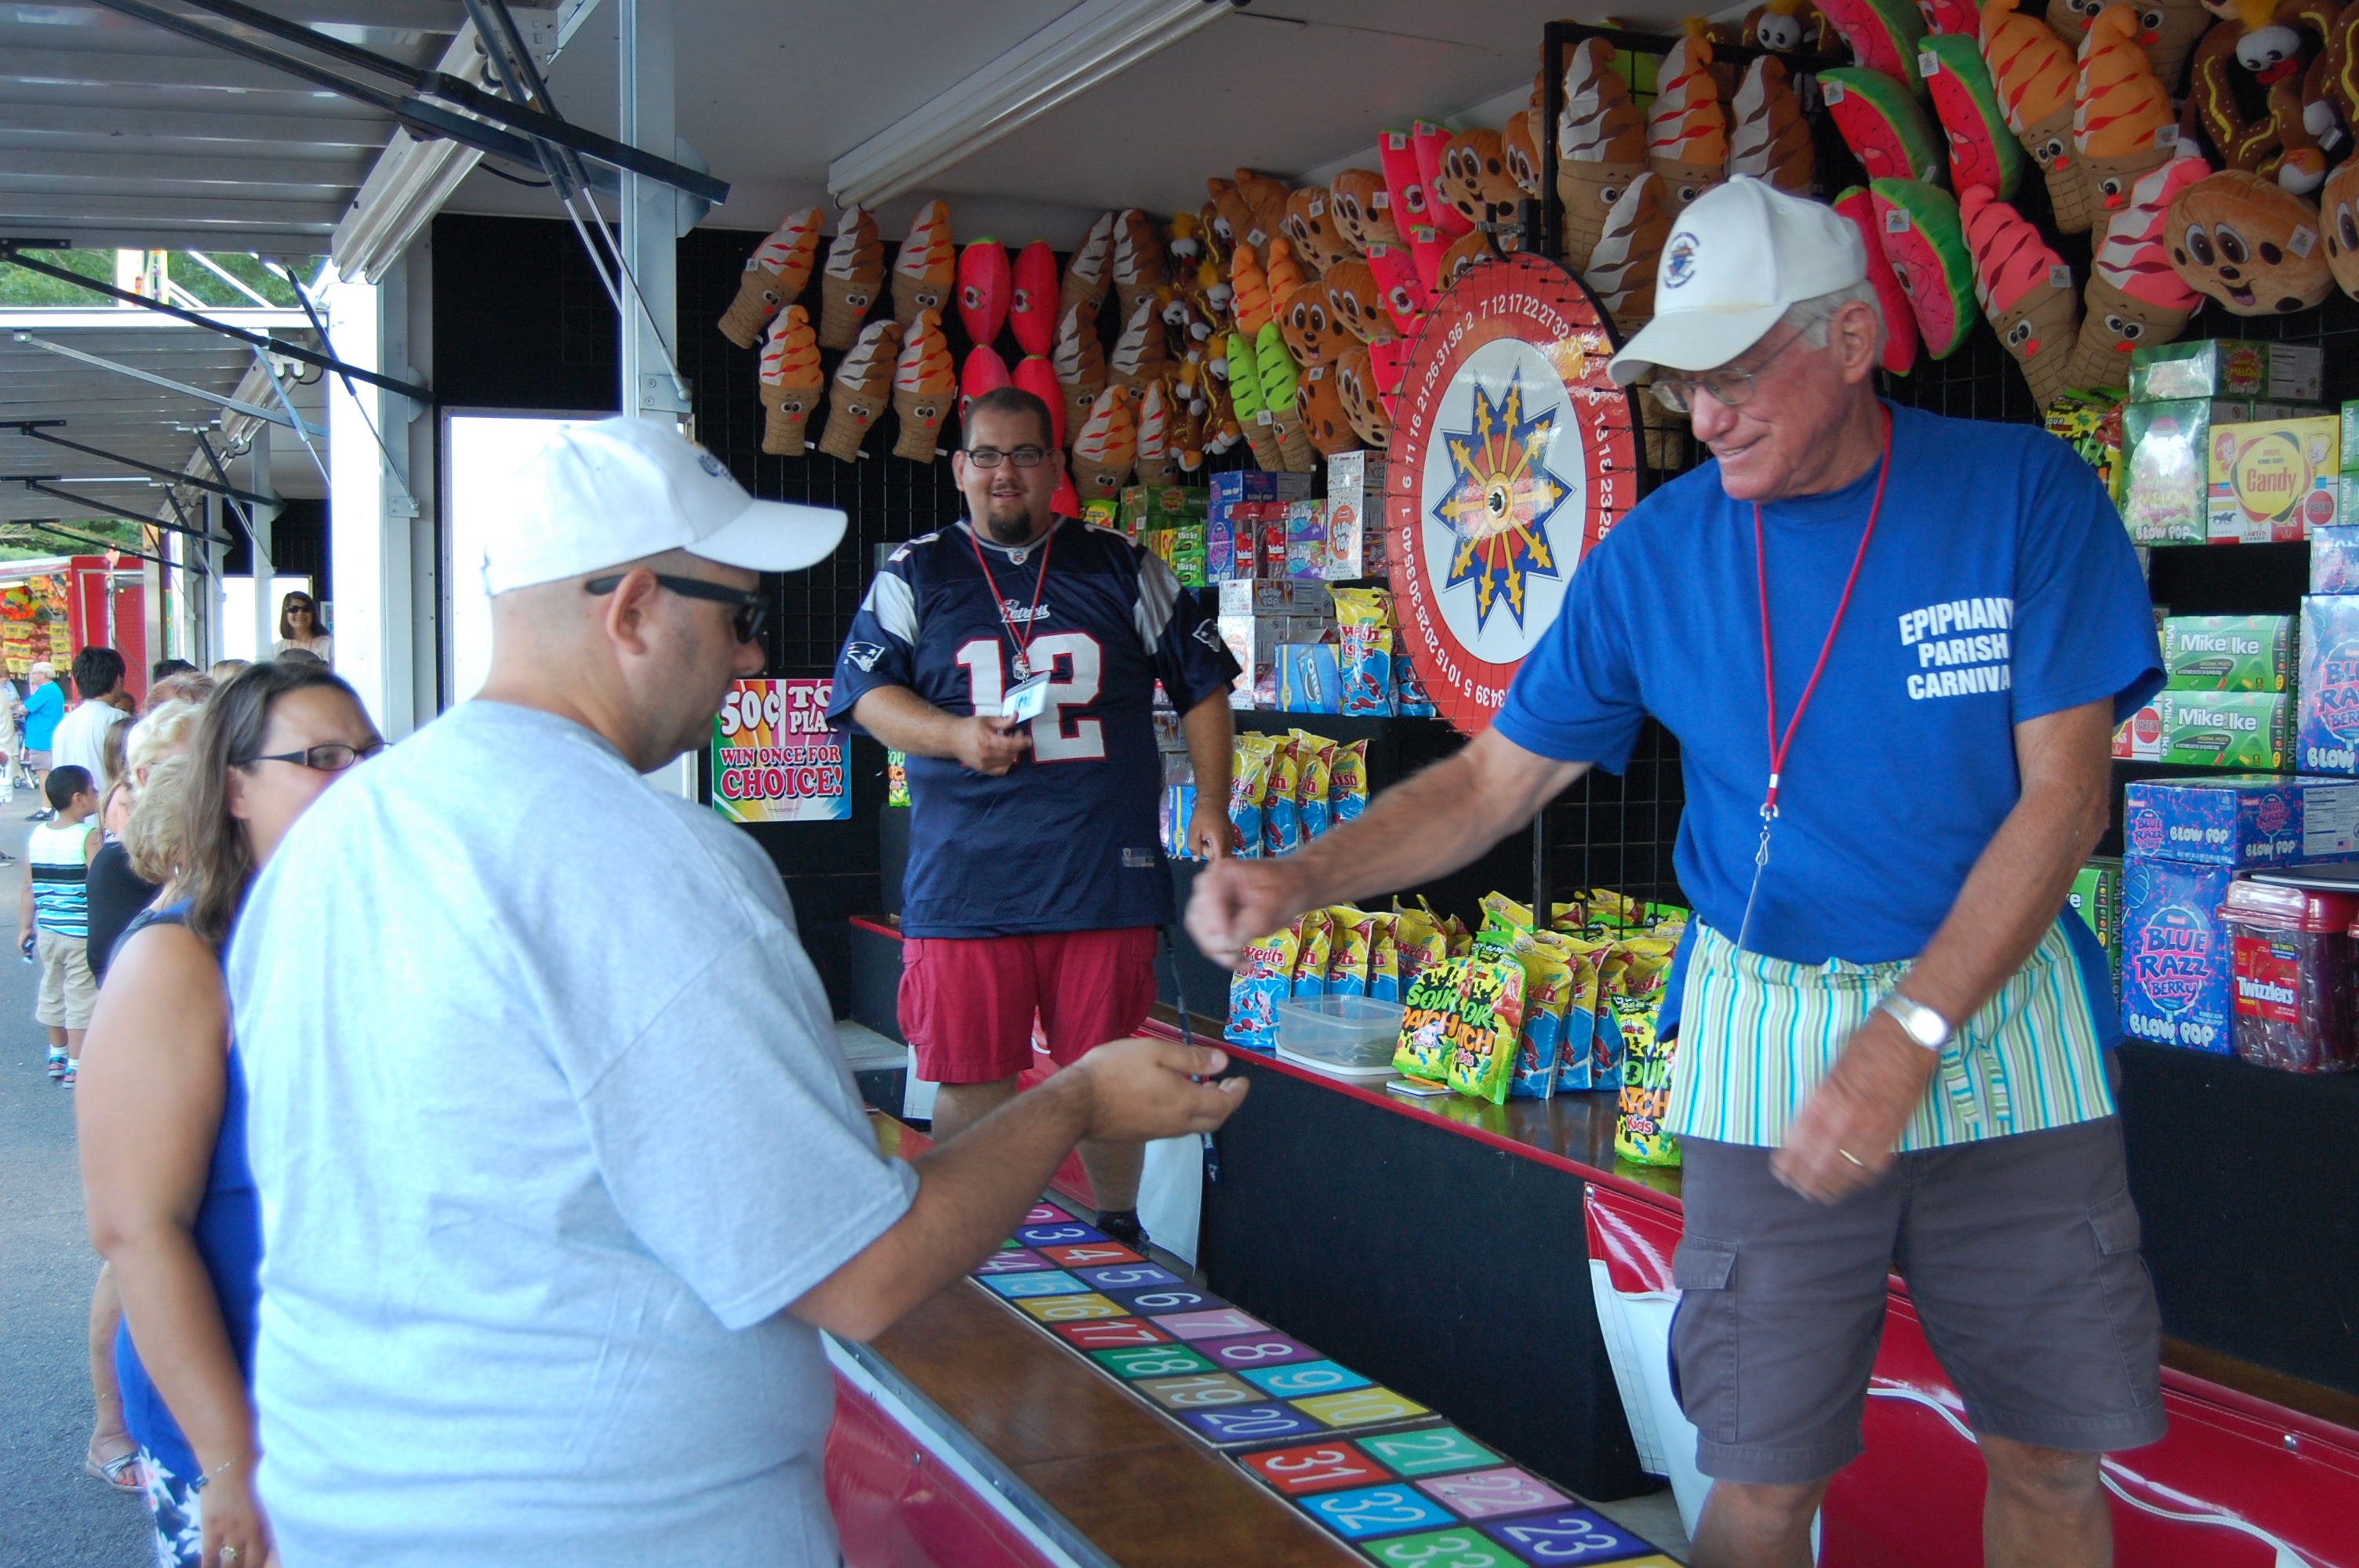 Volunteers man the games tent at the 2015 Italian Feast at the Jersey Shore in Brick. (Photo: Daniel Nee)